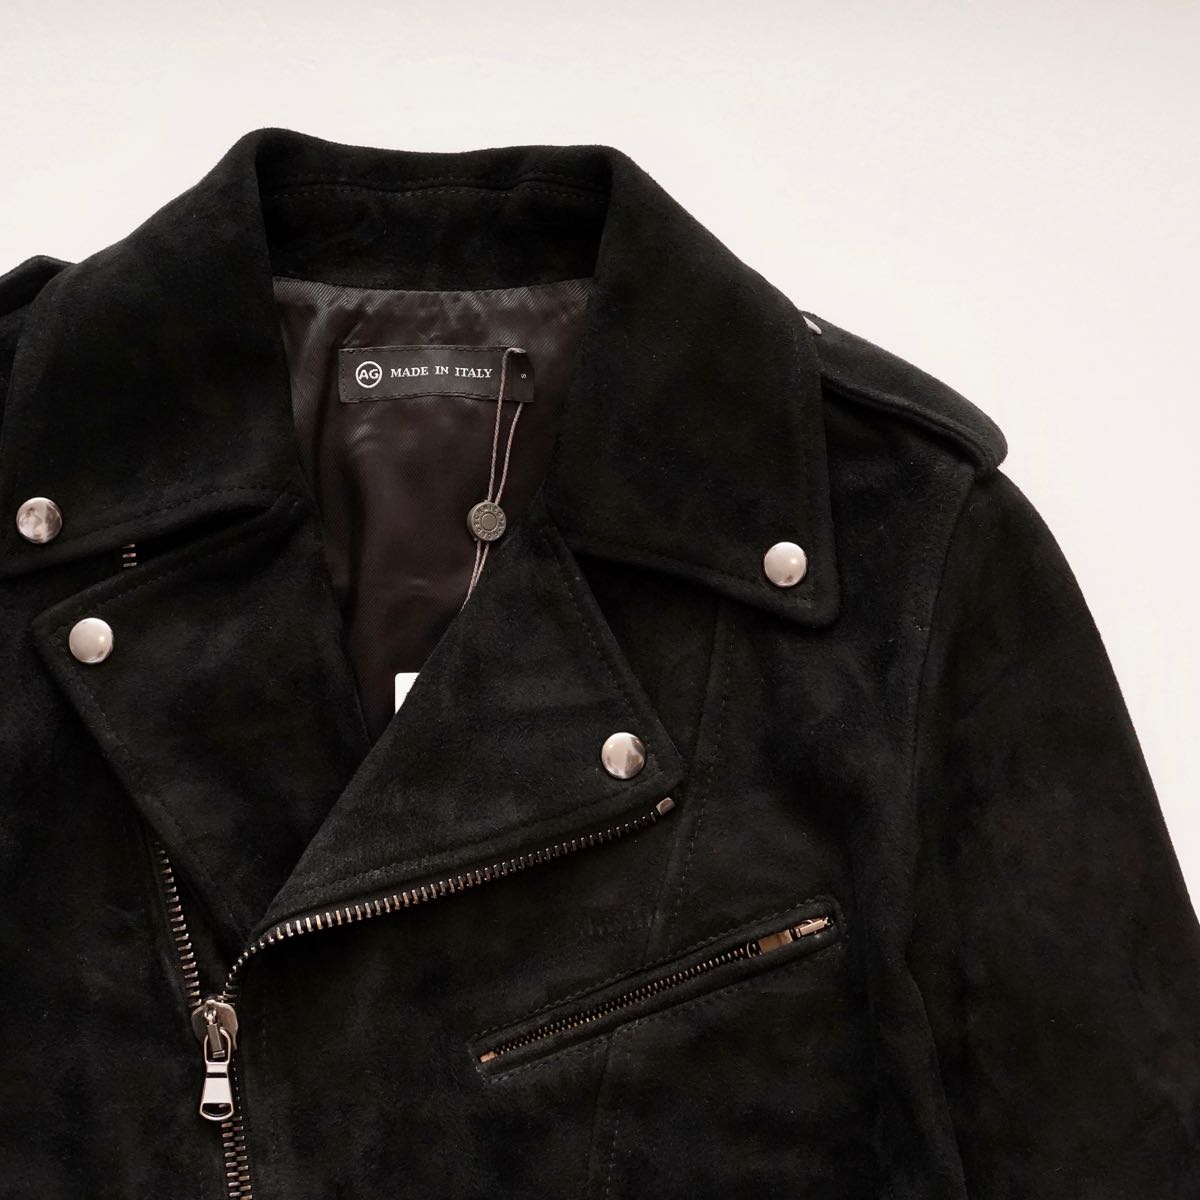 AG/ADRIANO GOLDSCHMIED エージー ブラック スウェード ライダースジャケット イタリア製 BLACK SUEDE RIDERS JACKET MADE IN ITALY WOMEN